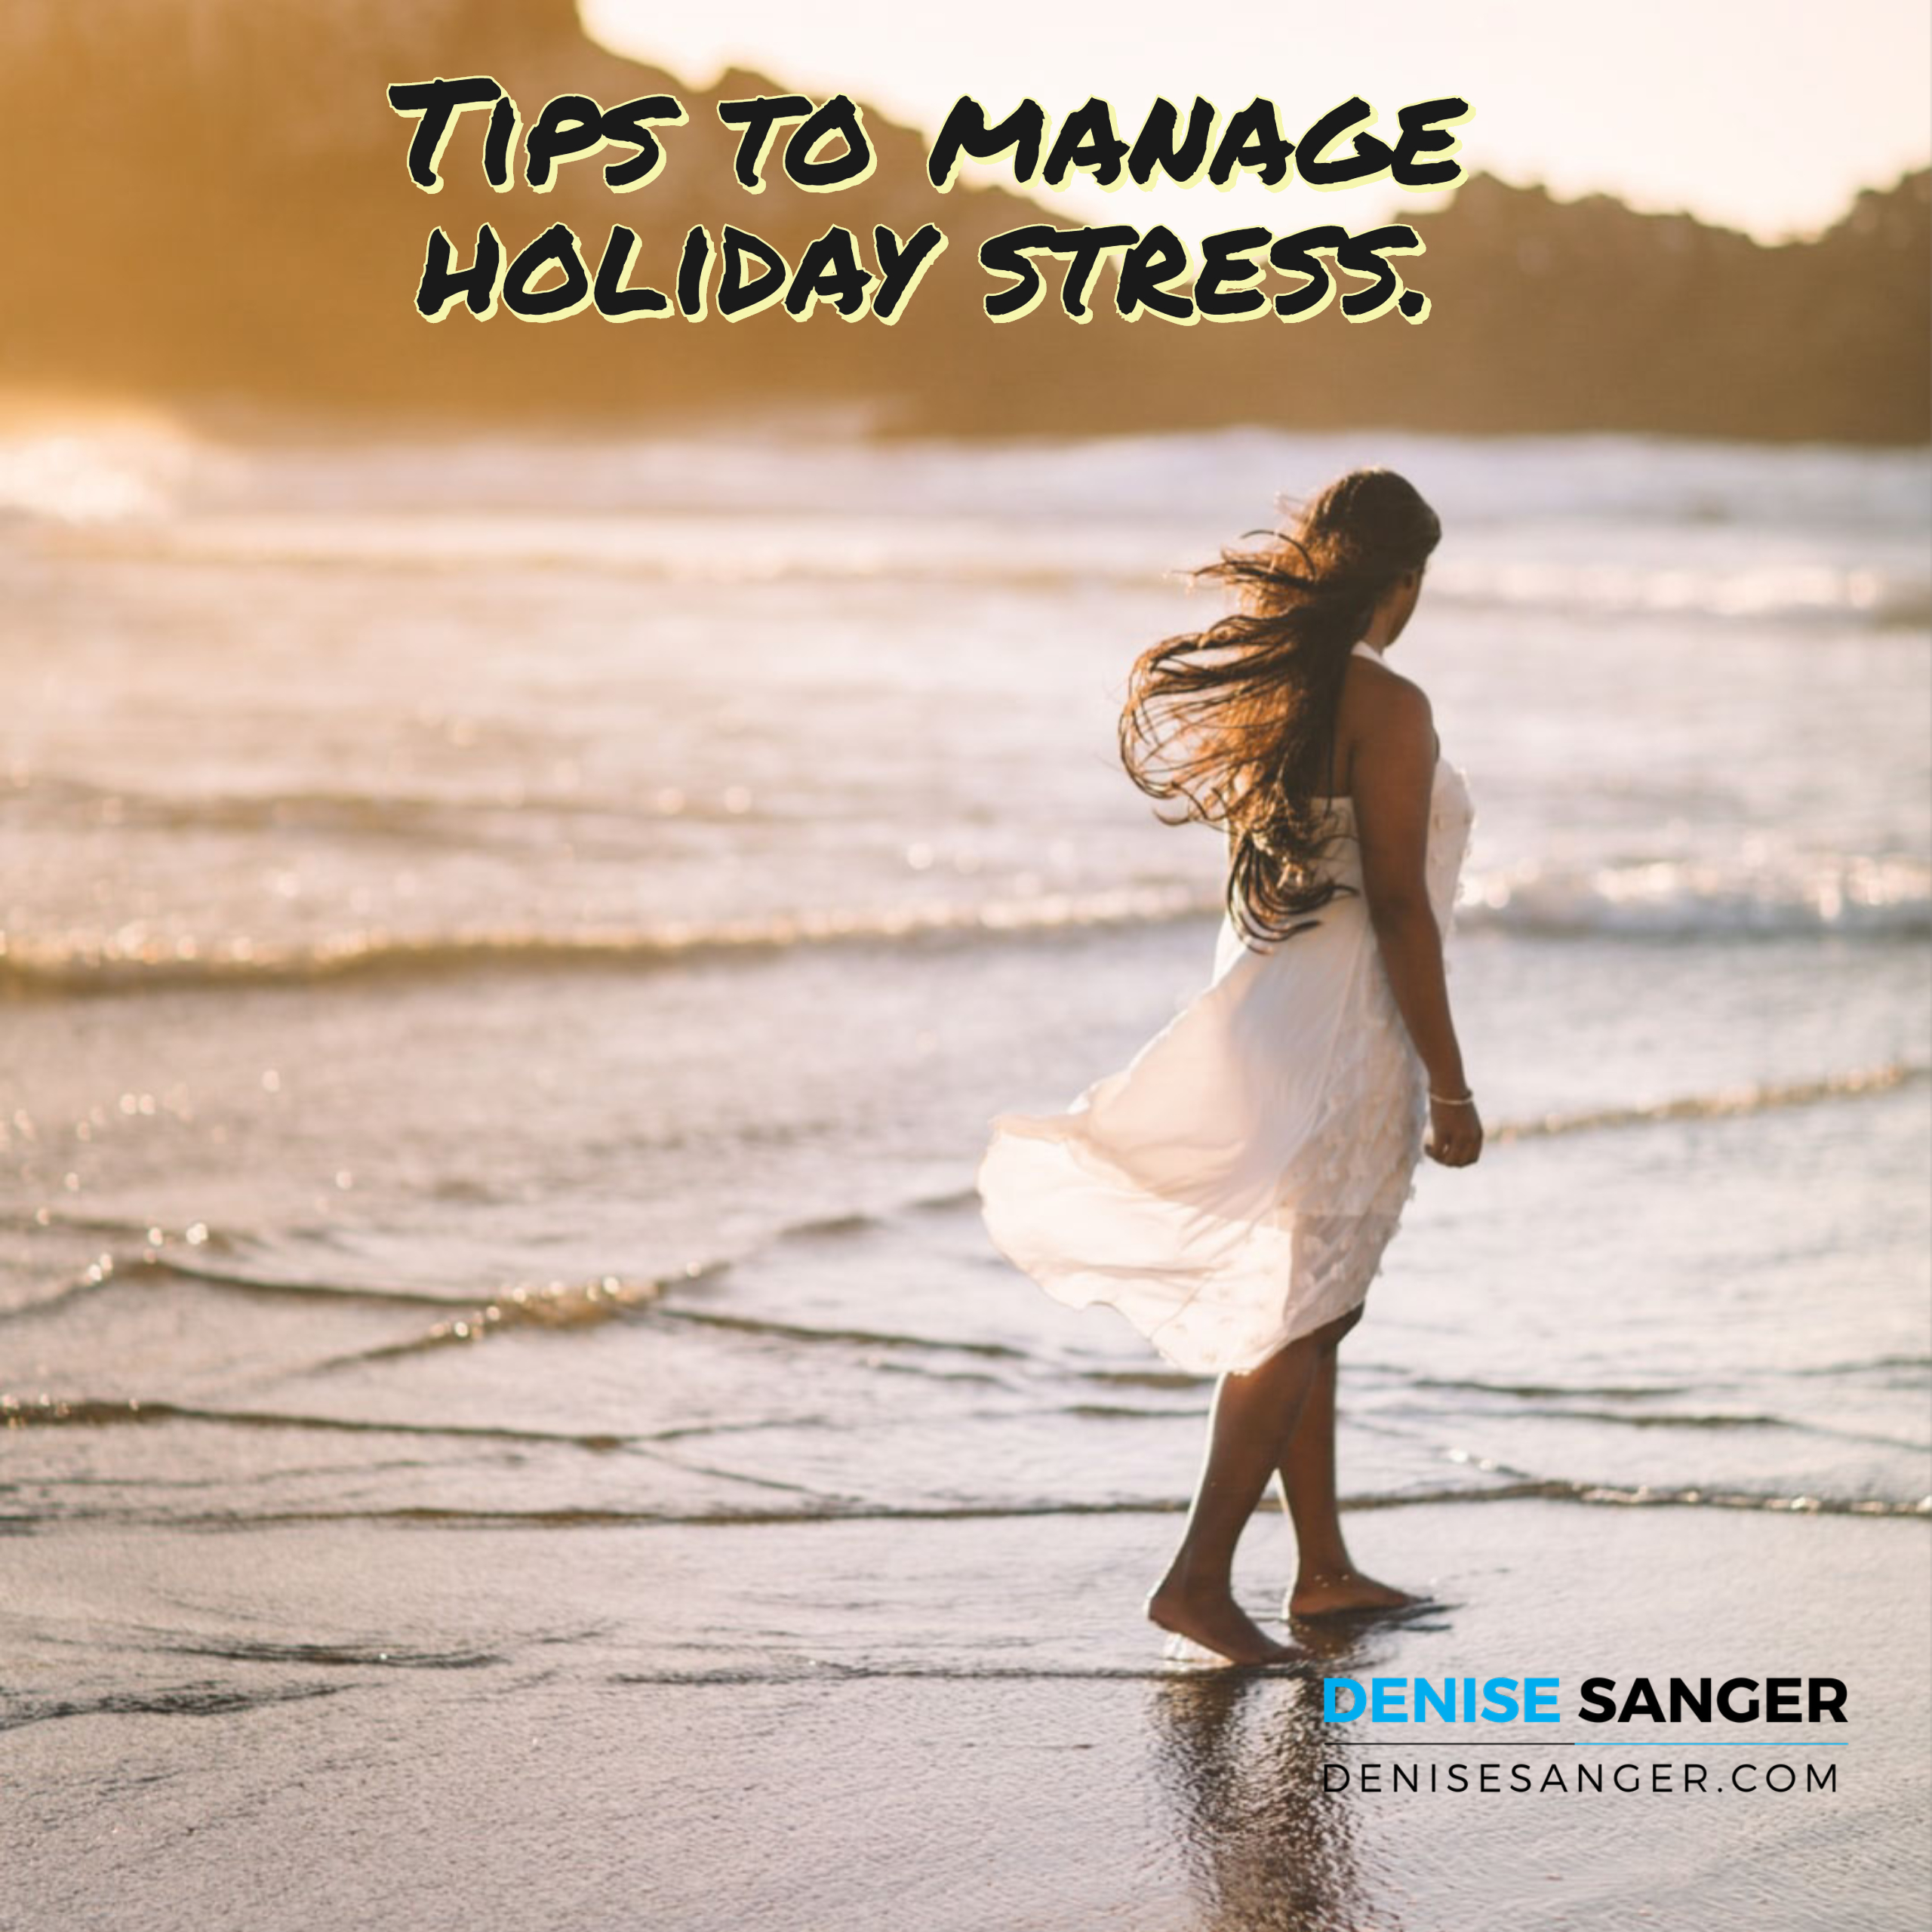 Tips to manage holiday stress